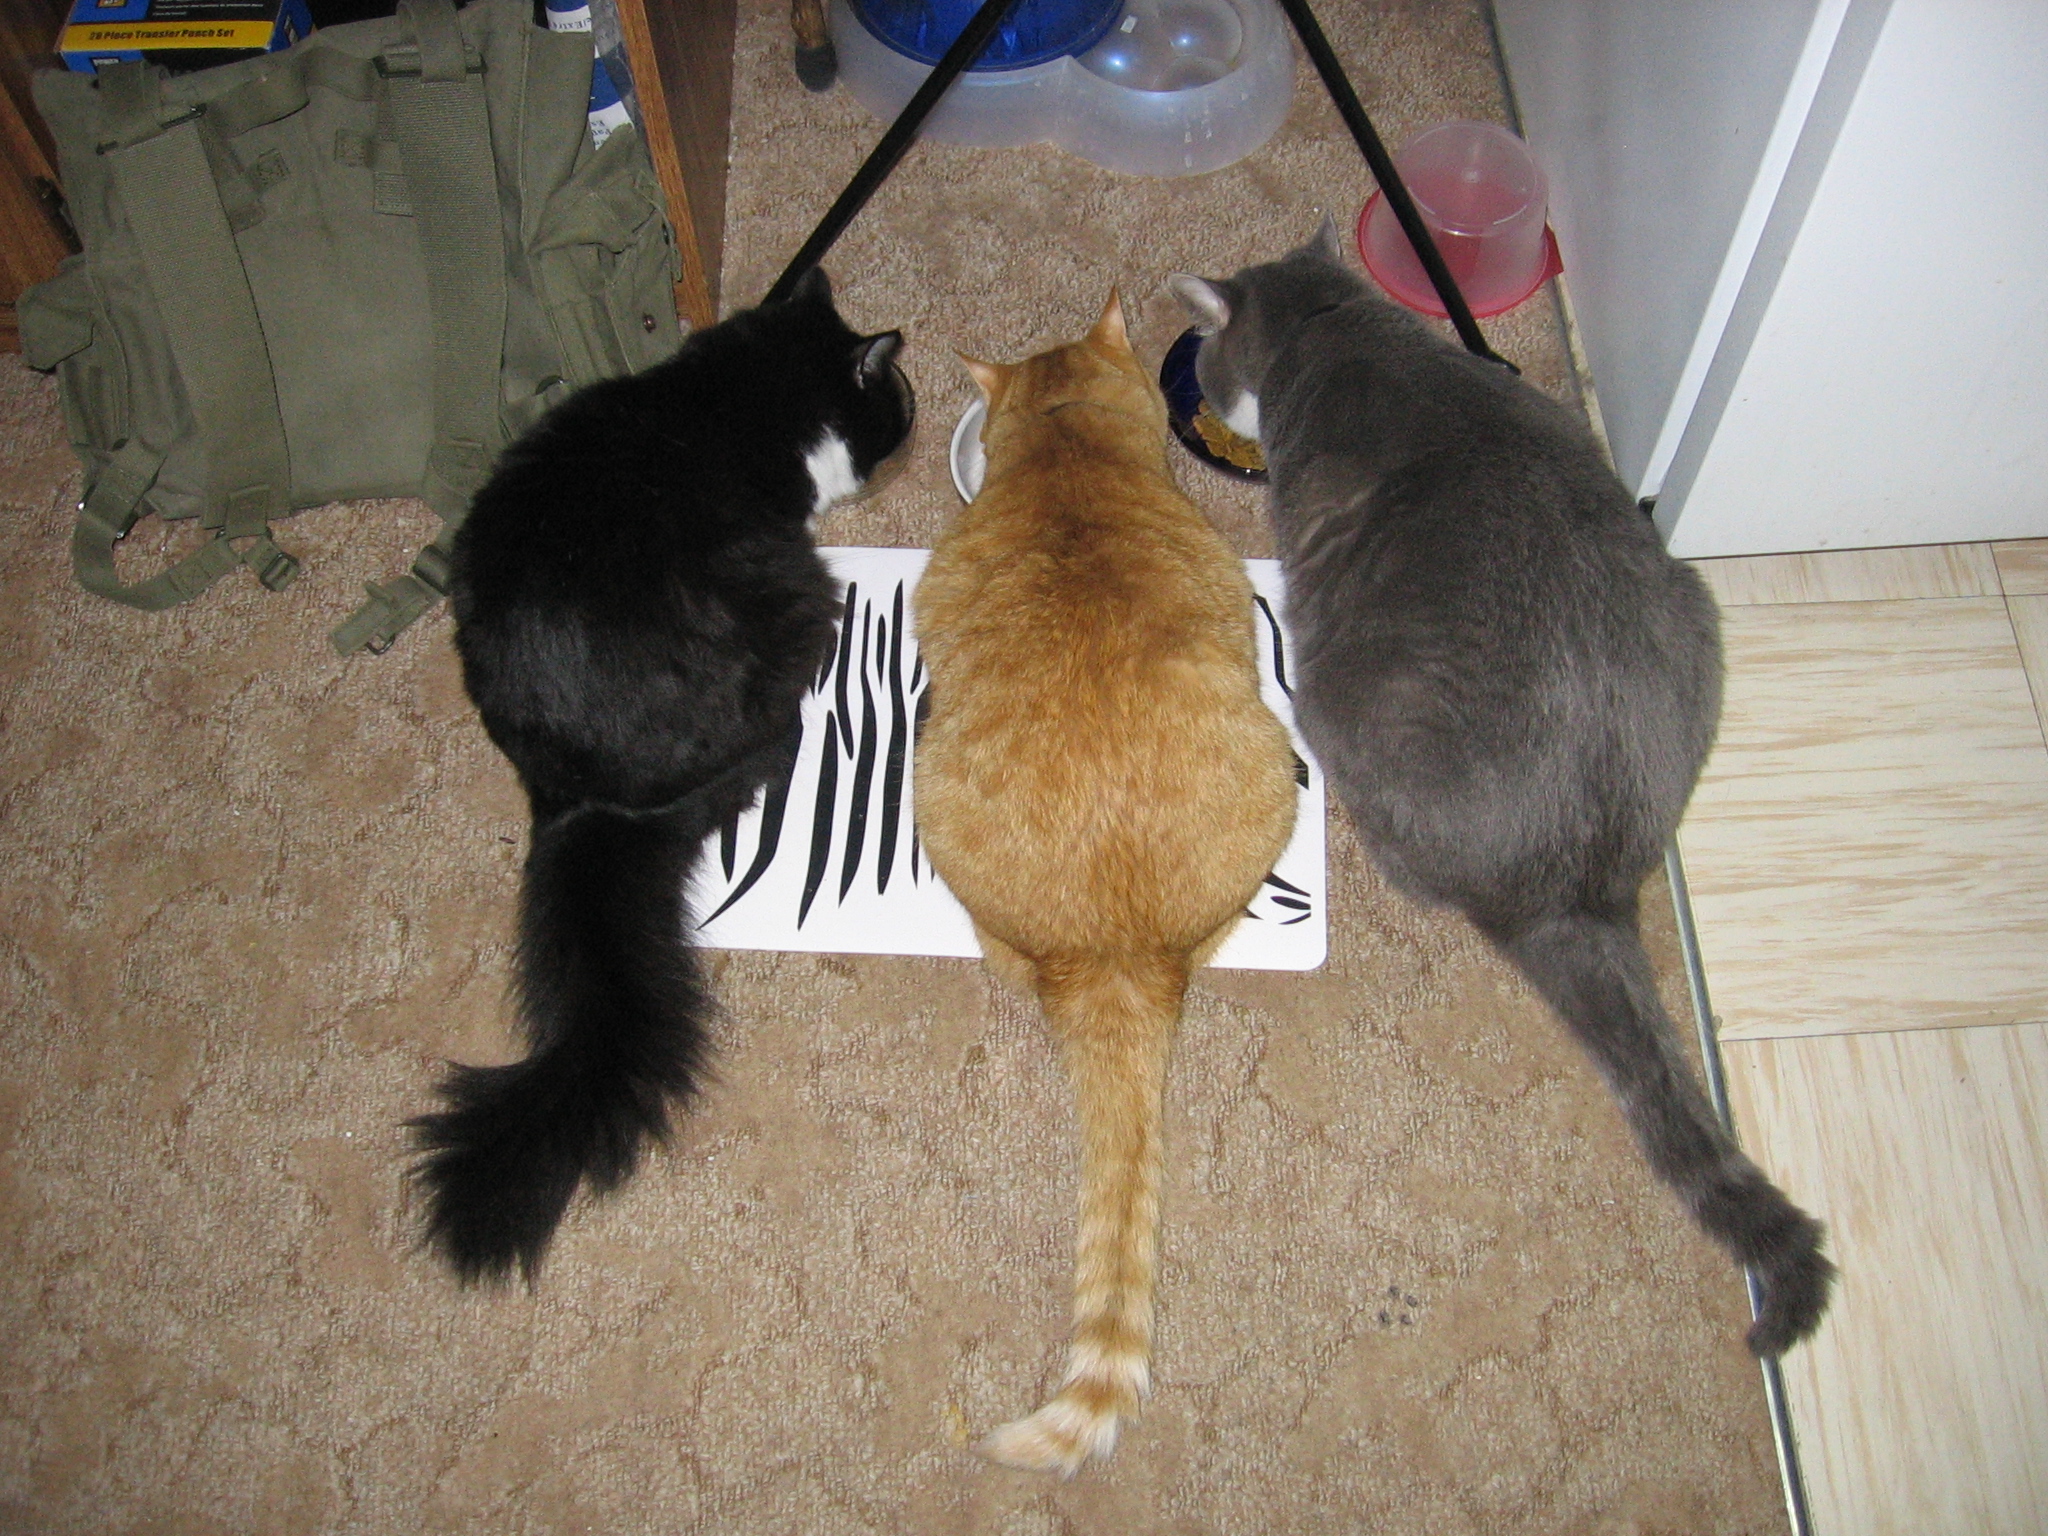 The three cats, Nikita, Jack, and Raistlin, eating from bowls beside eachother.